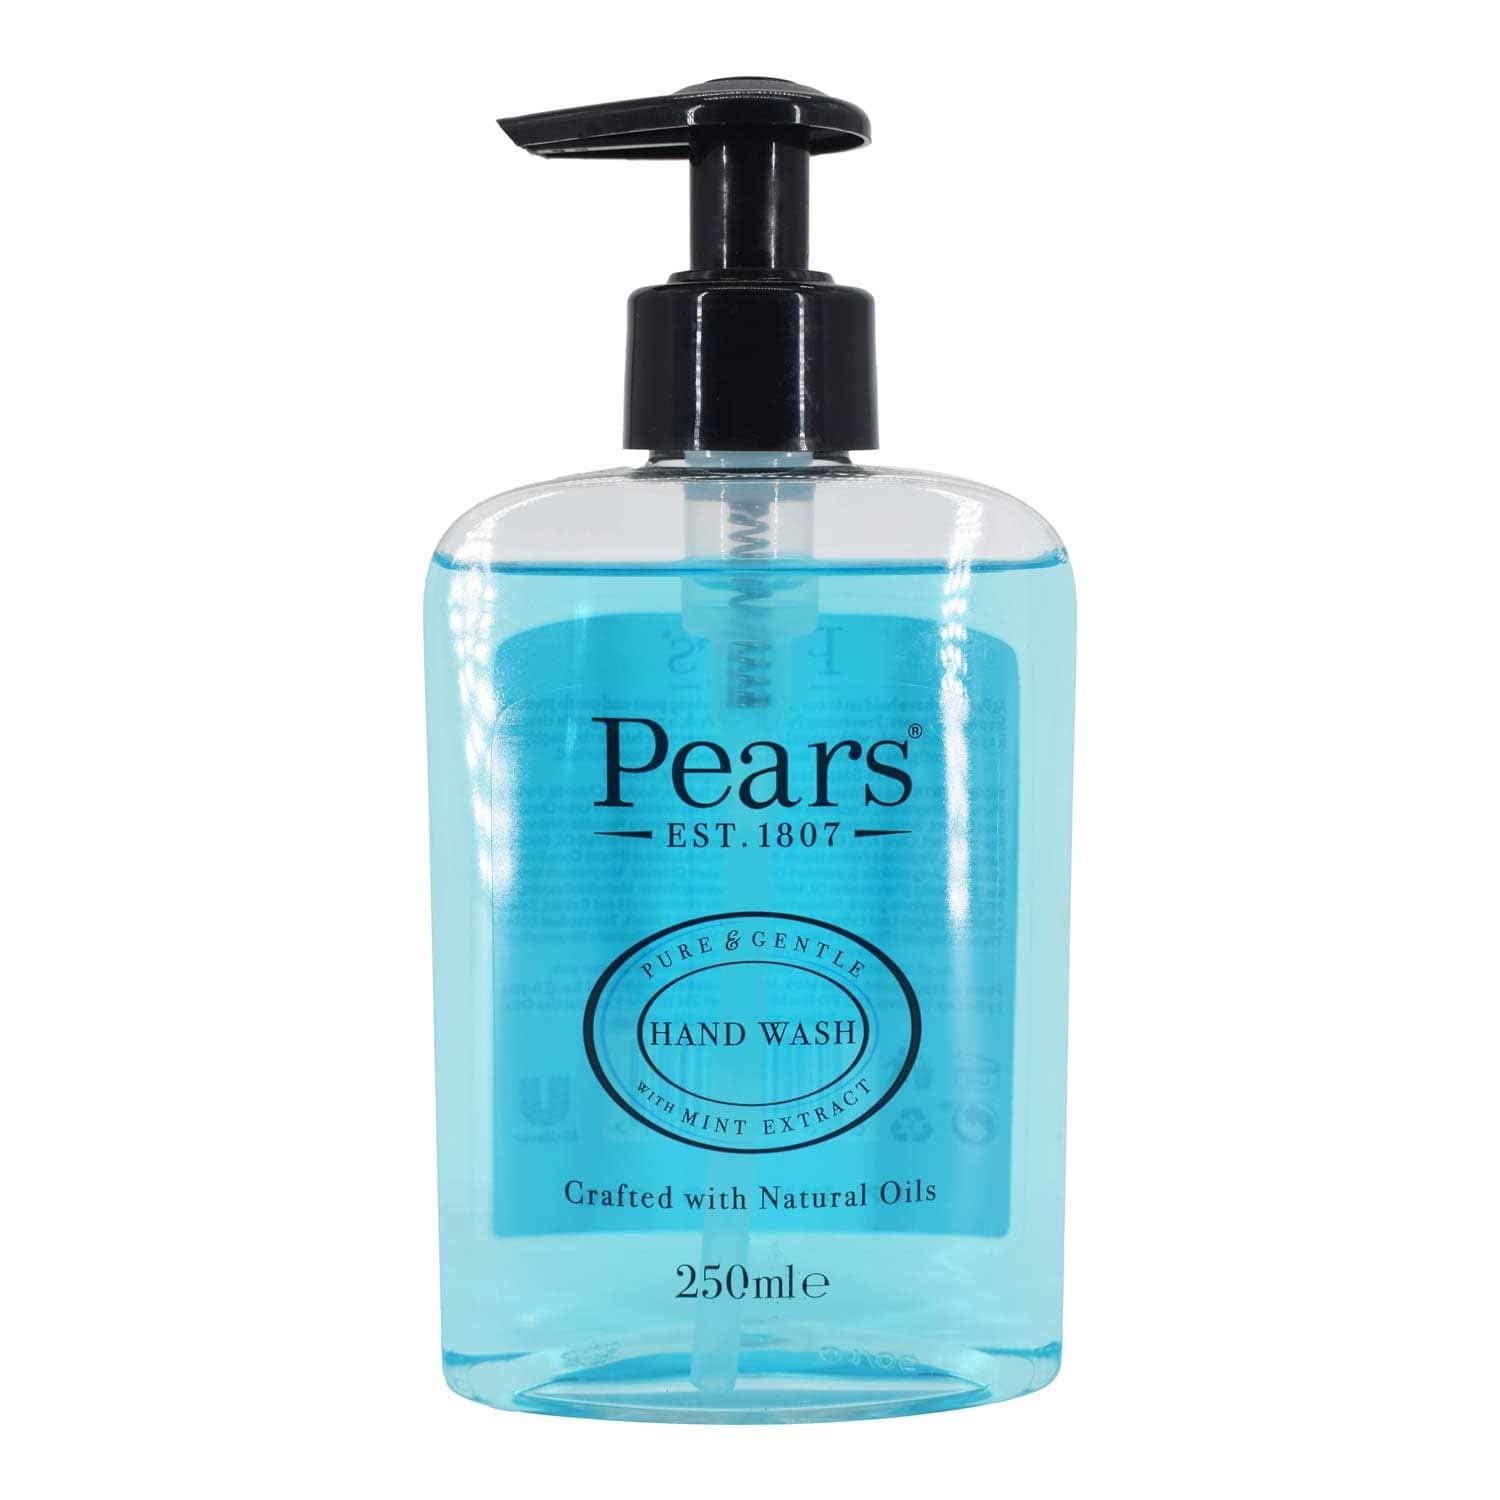 Pears Pure & Gentle Hand Wash with Mint Extract - 250ml